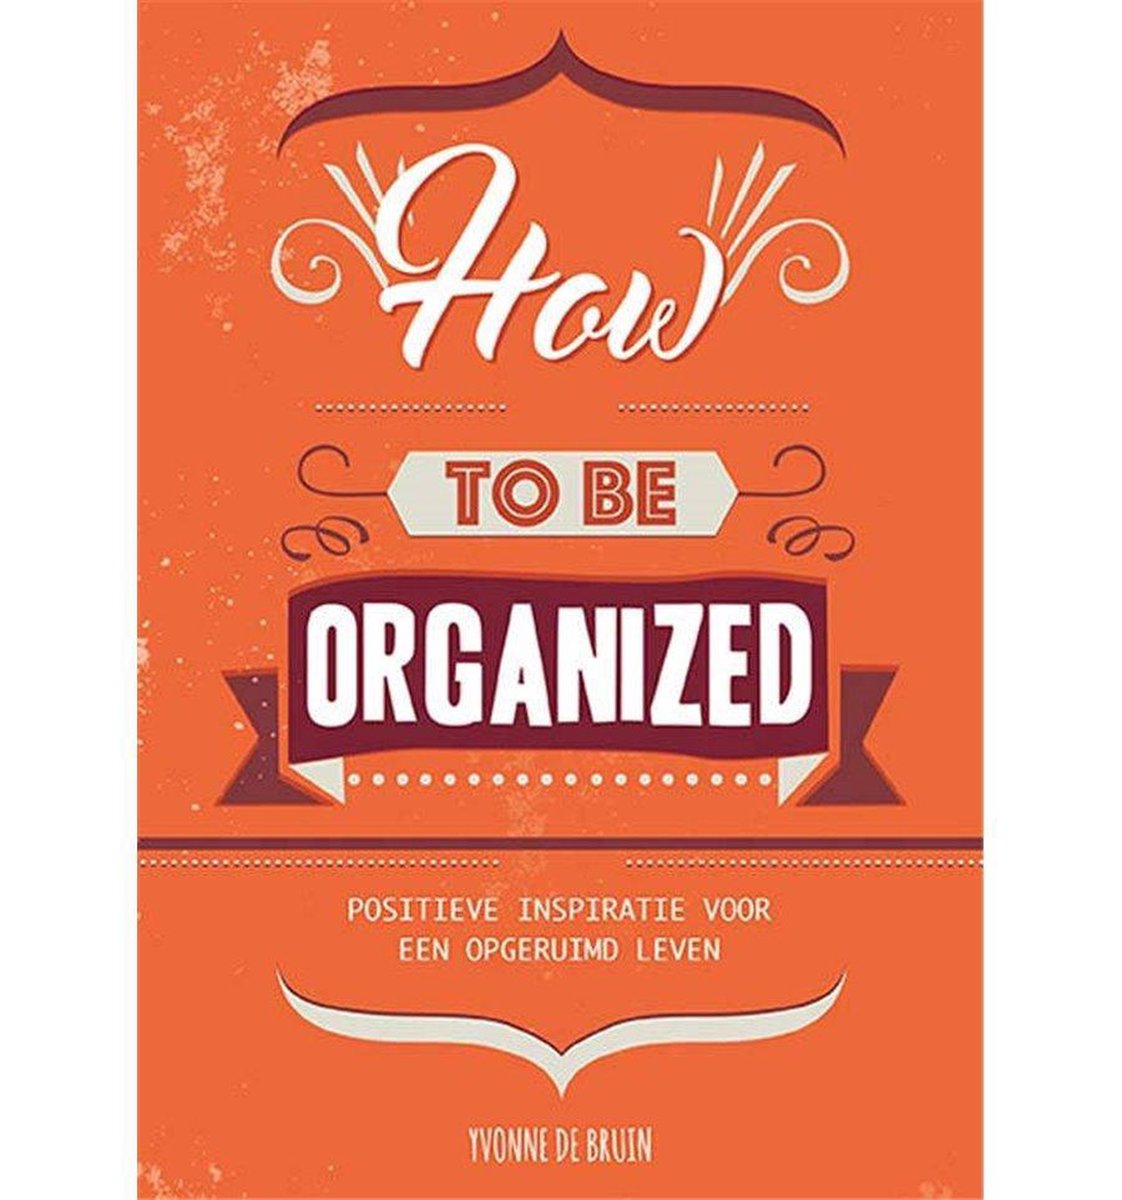 How to be organized